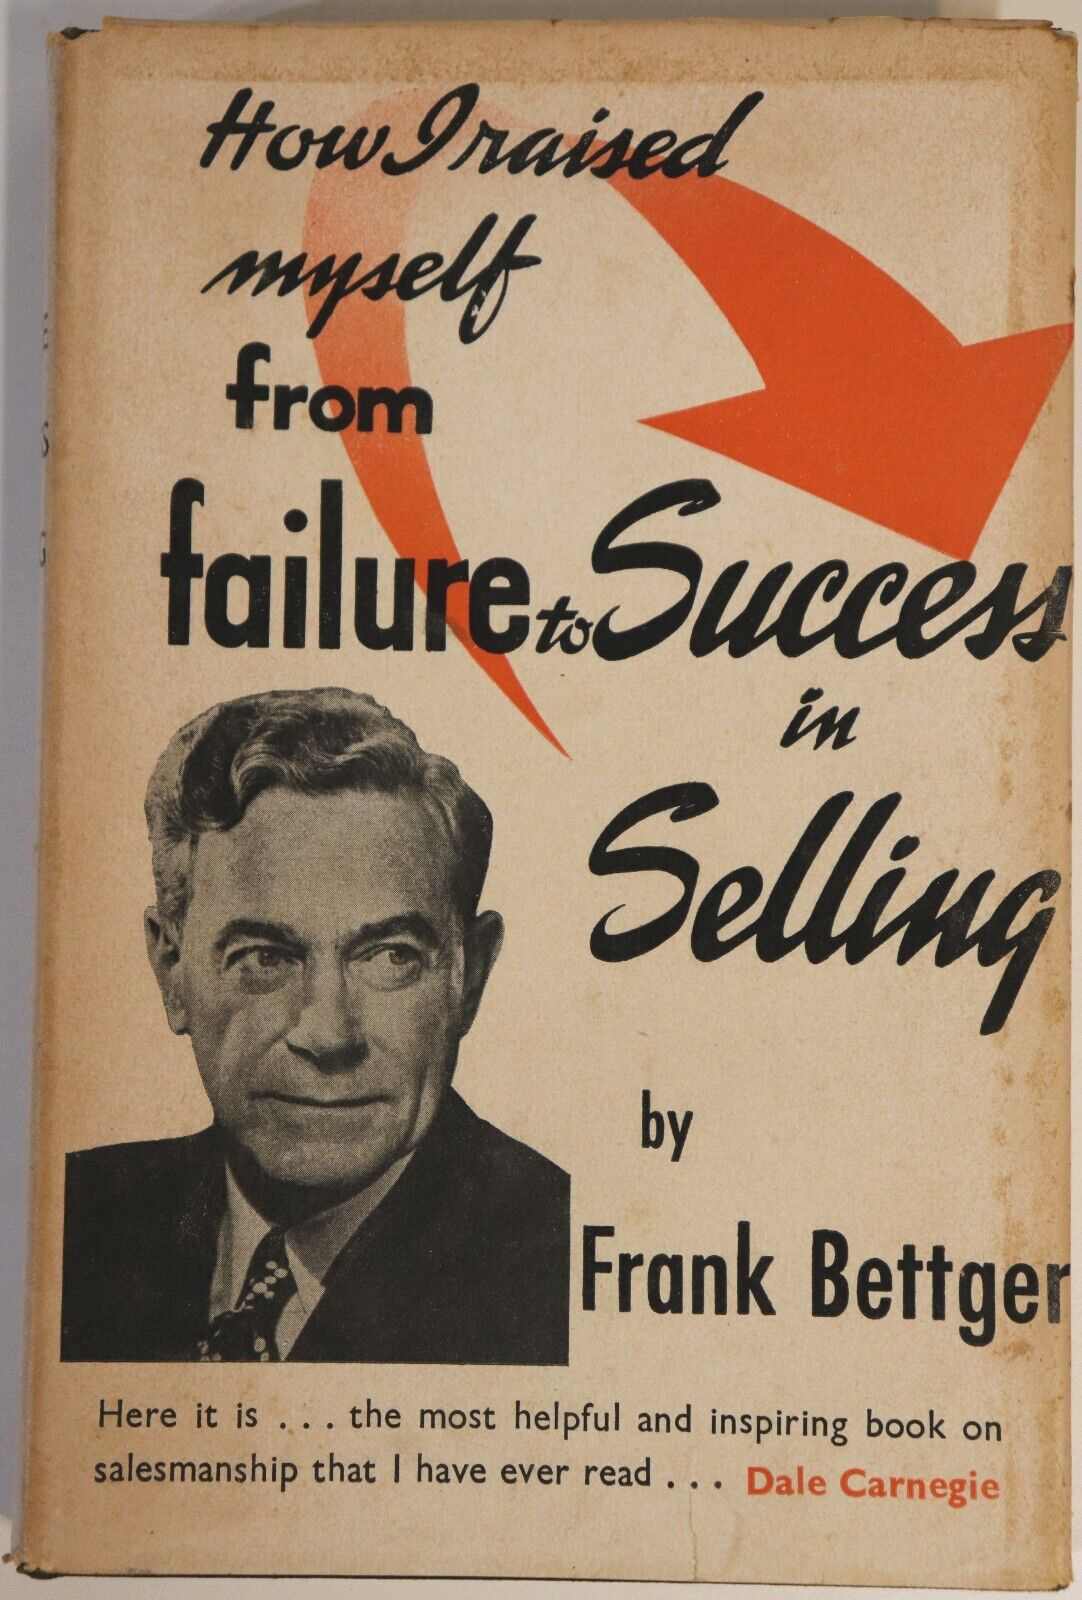 From Failure To Success In Selling - 1955 - Vintage Sales Training Book